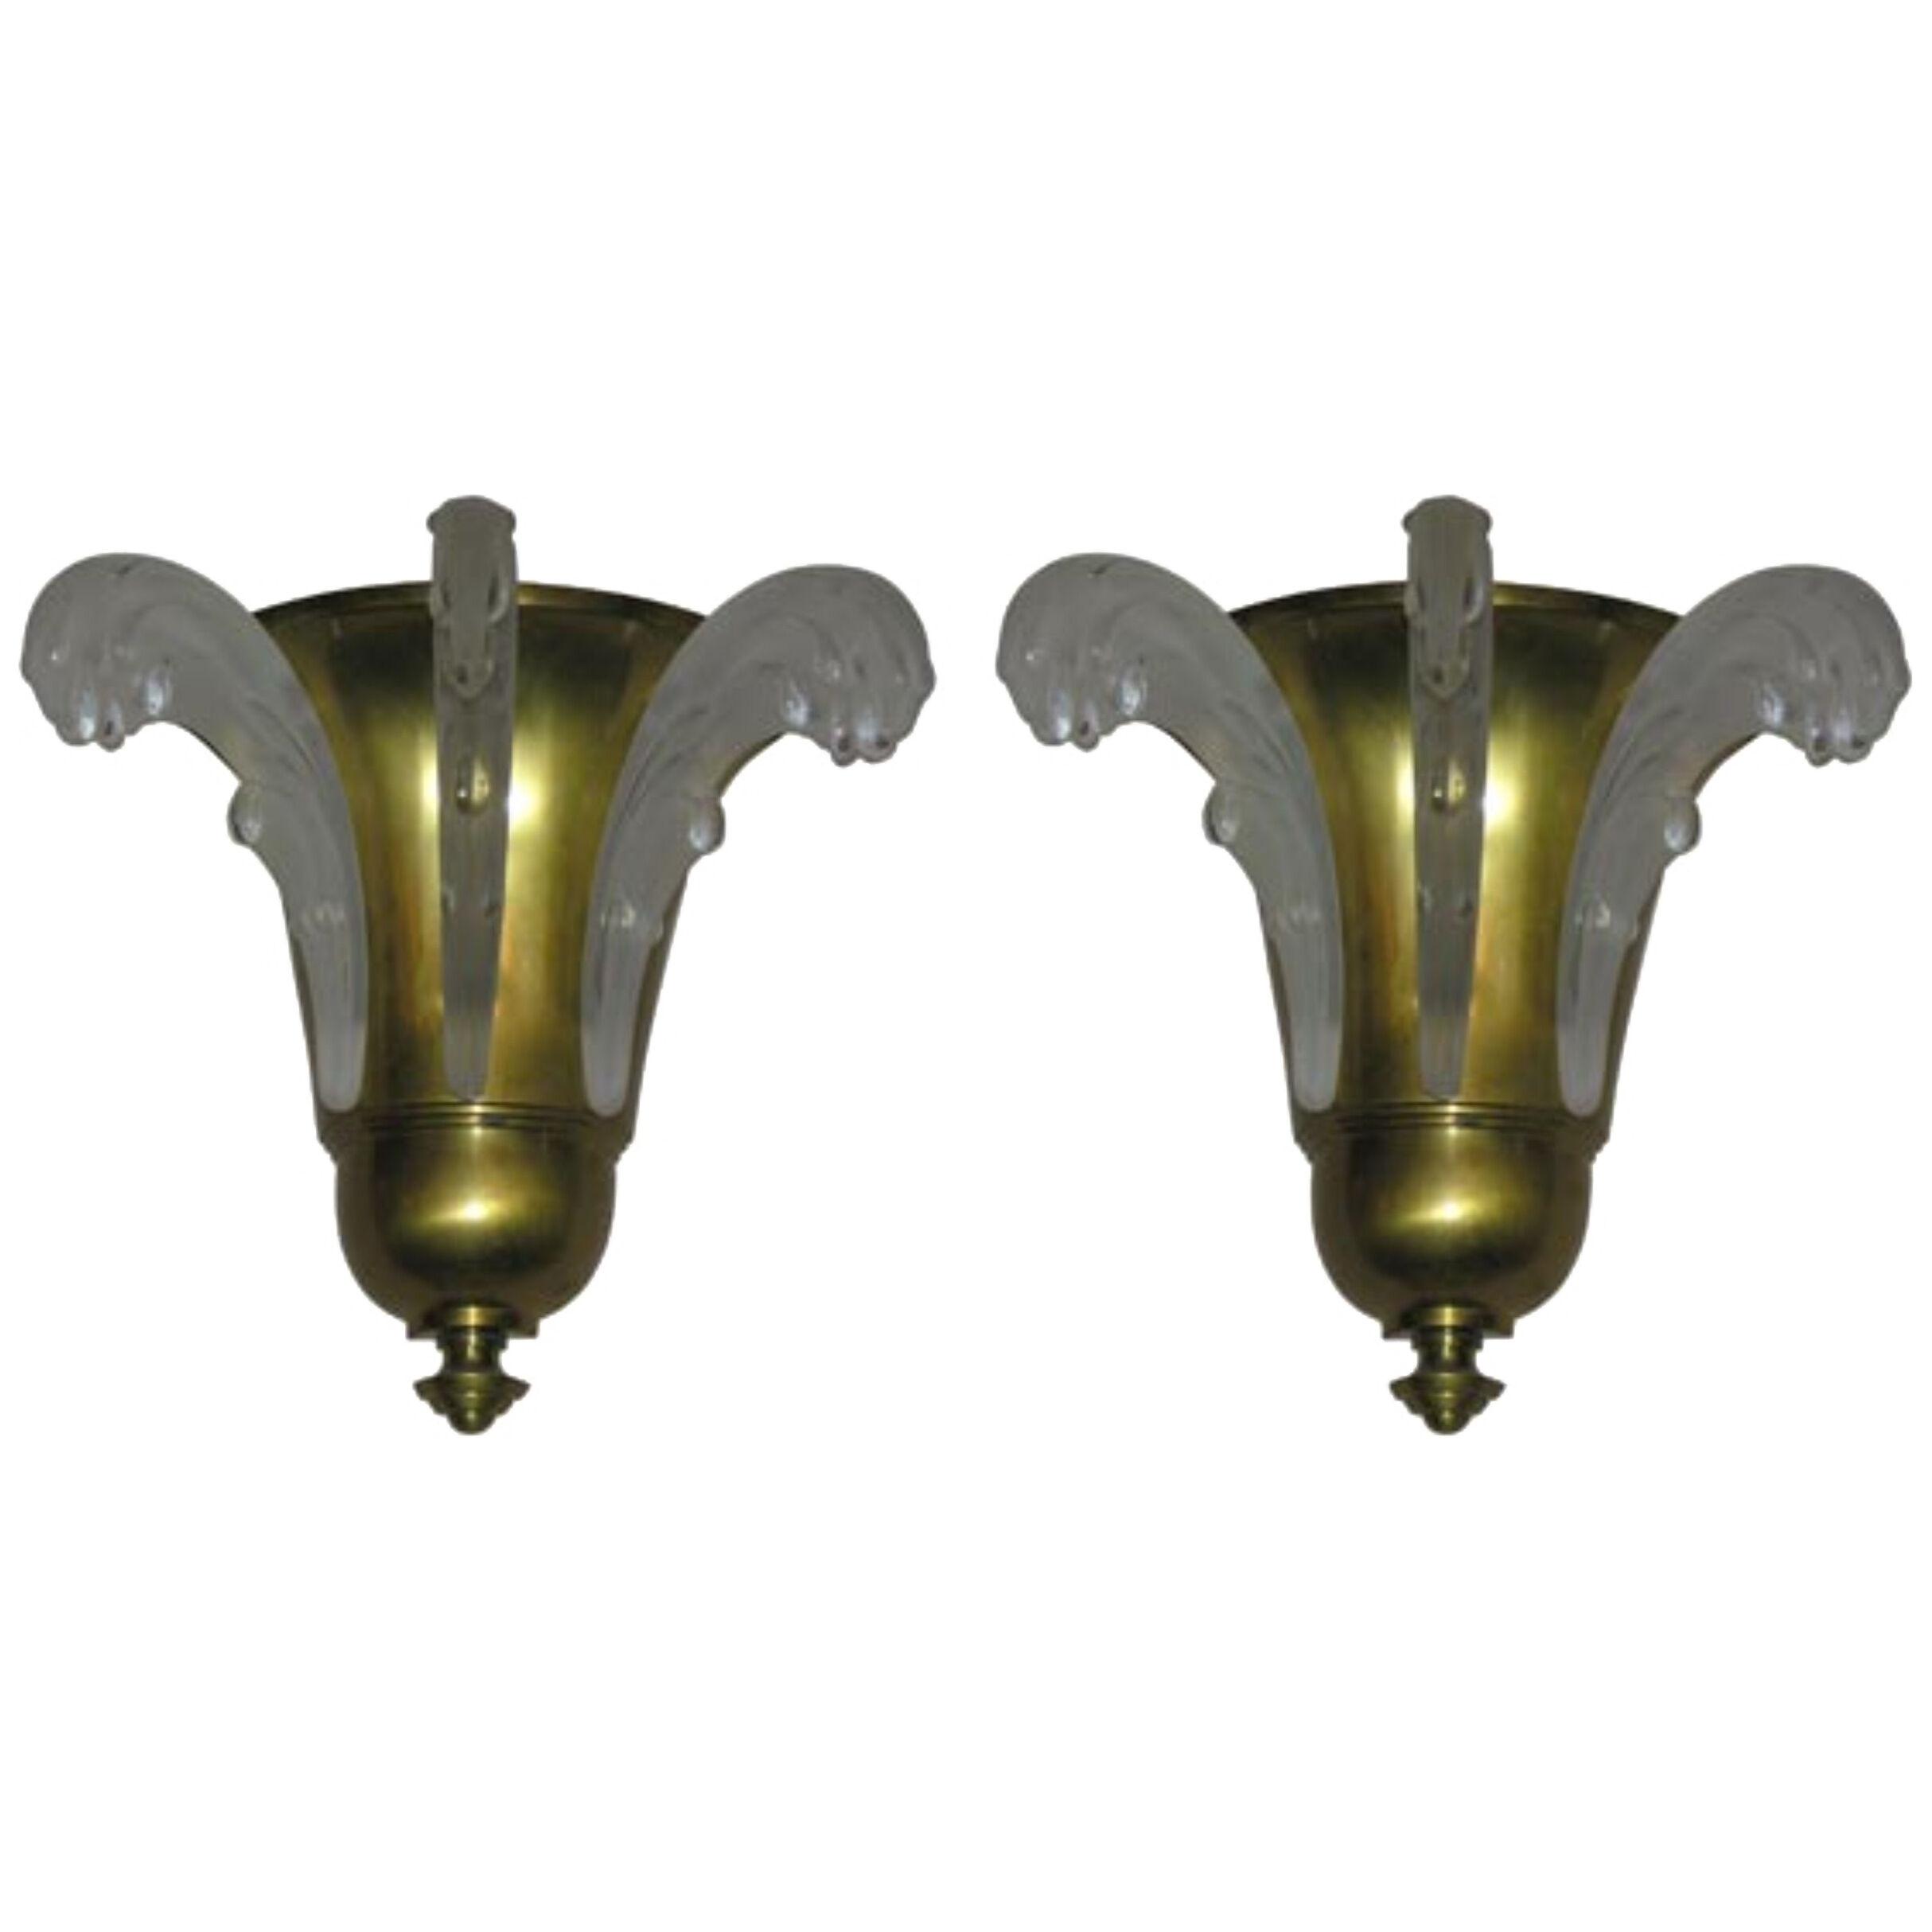 Pair of French Art Deco Wall Sconces